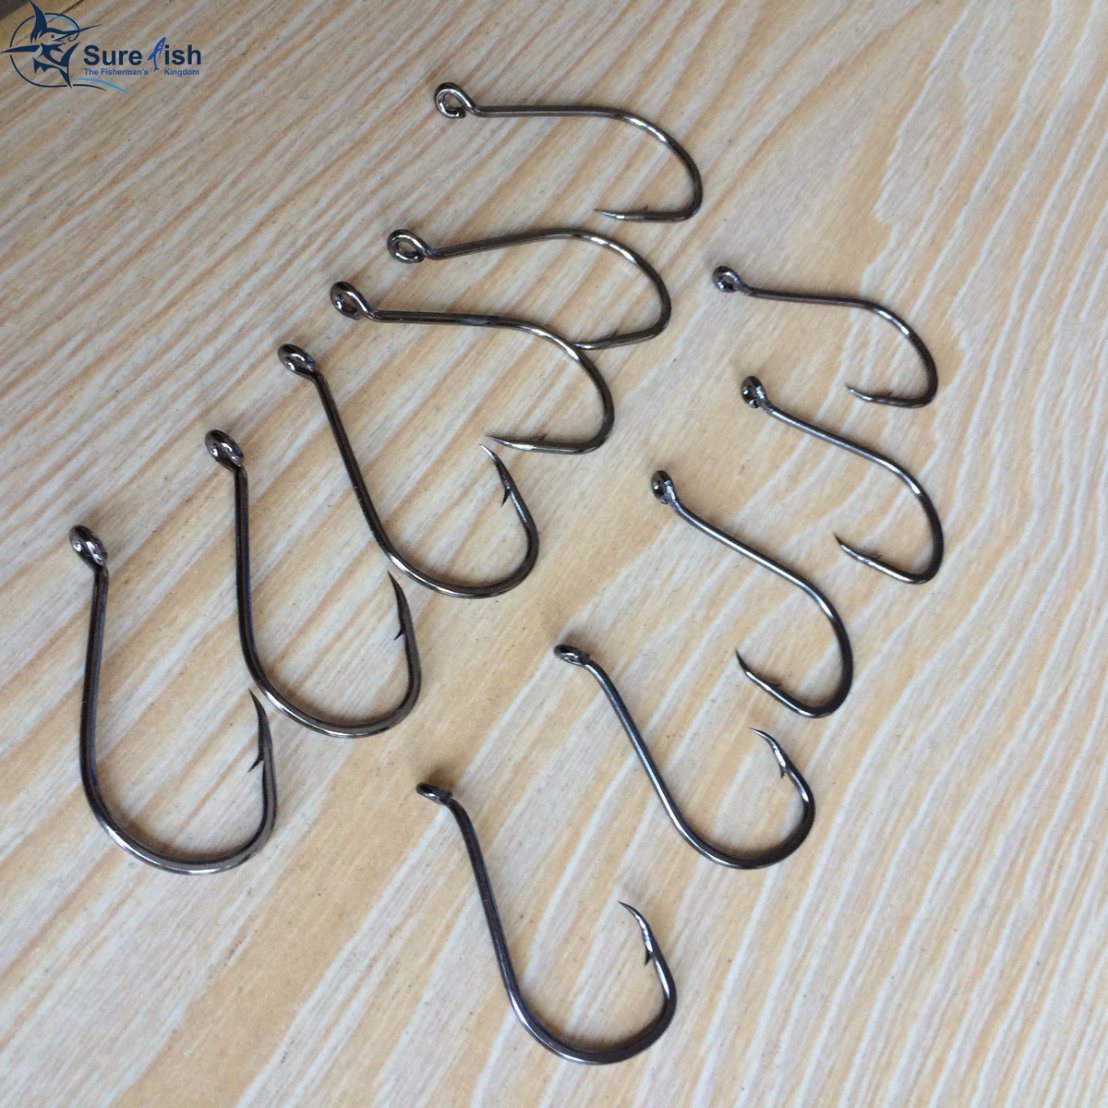 Wholesale Price Valued High Carbon Sport Circle Fishing Hook